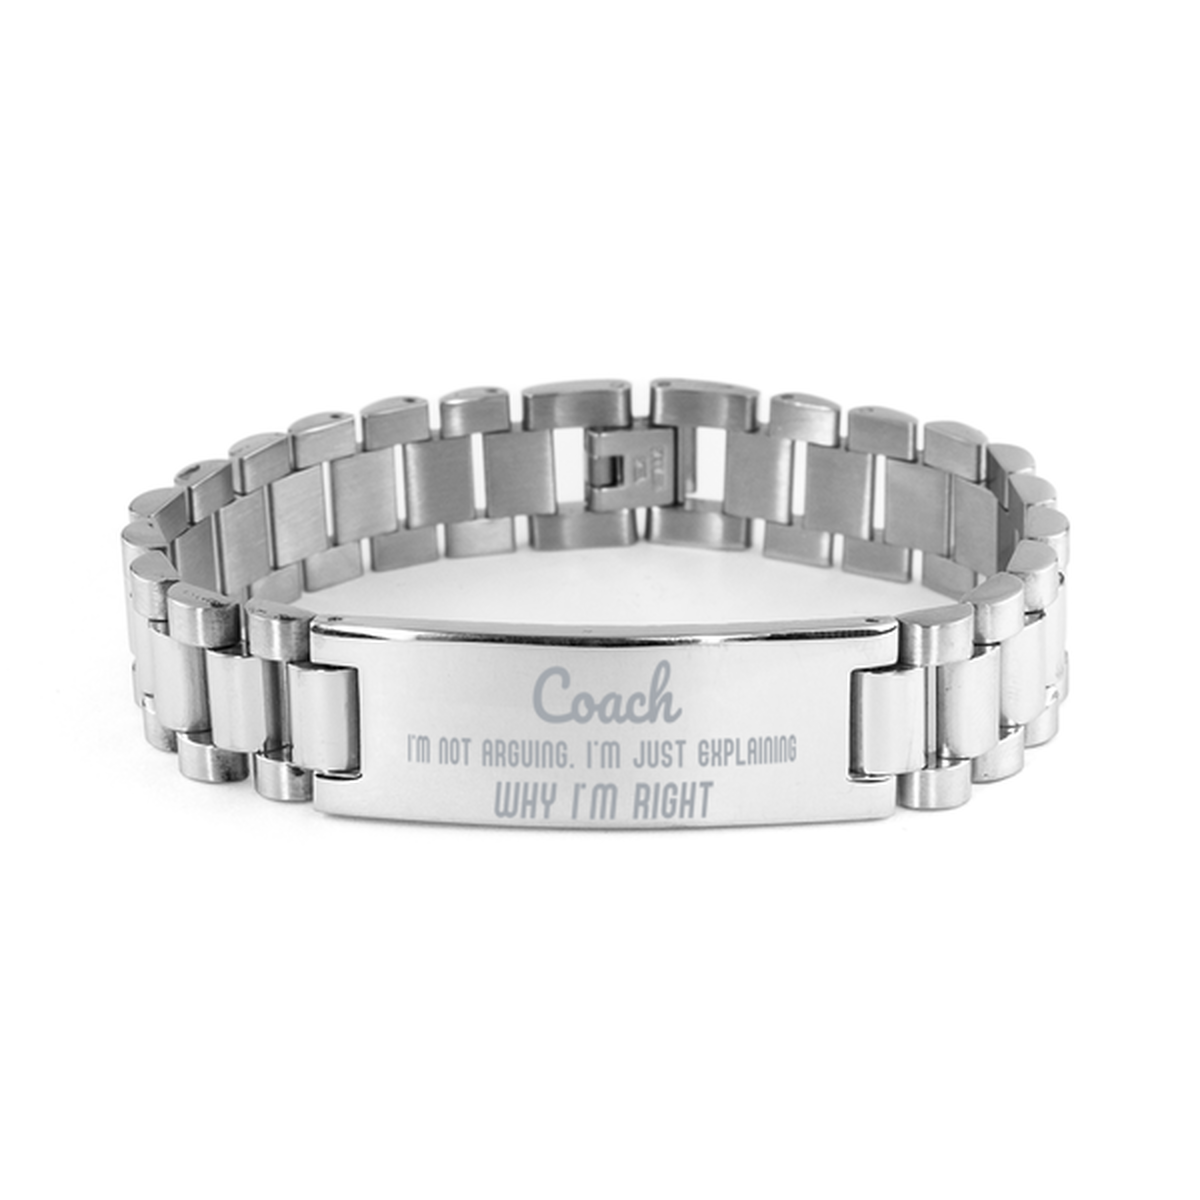 Coach I'm not Arguing. I'm Just Explaining Why I'm RIGHT Ladder Stainless Steel Bracelet, Graduation Birthday Christmas Coach Gifts For Coach Funny Saying Quote Present for Men Women Coworker